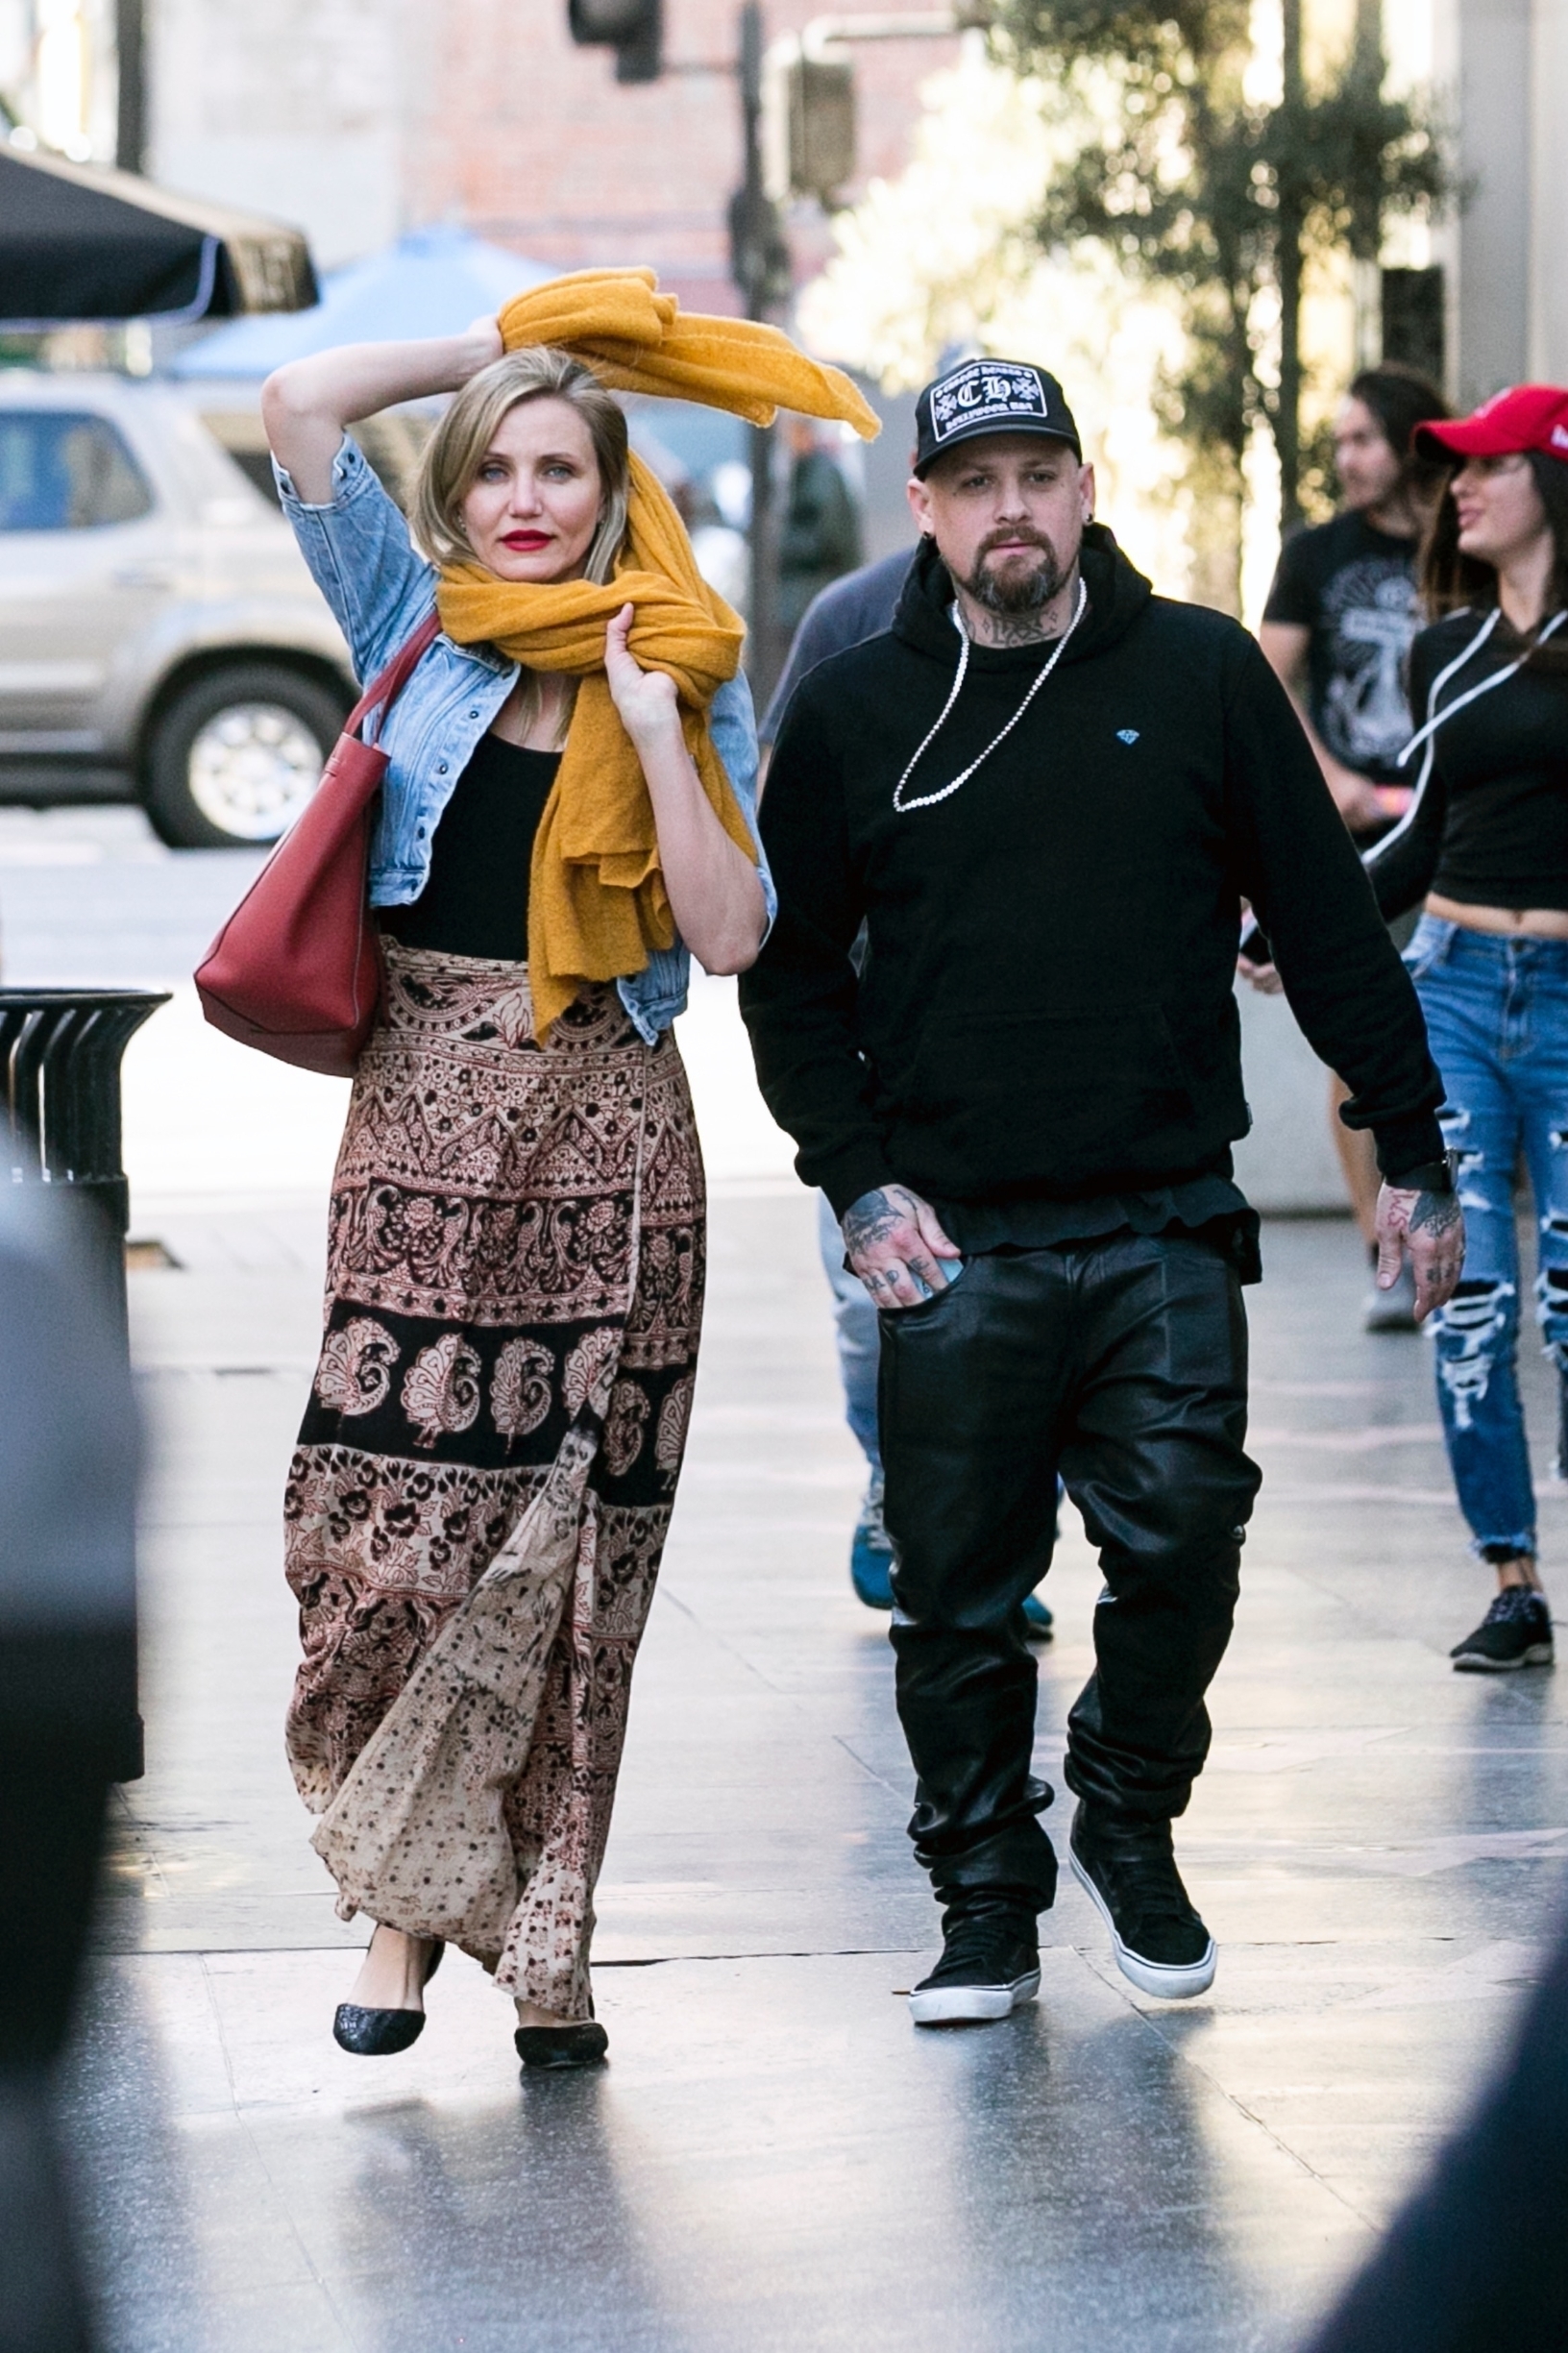 Los Angeles, CA  - *EXCLUSIVE* Camren Diaz and her hubby Benji Madden are seen heading to see 